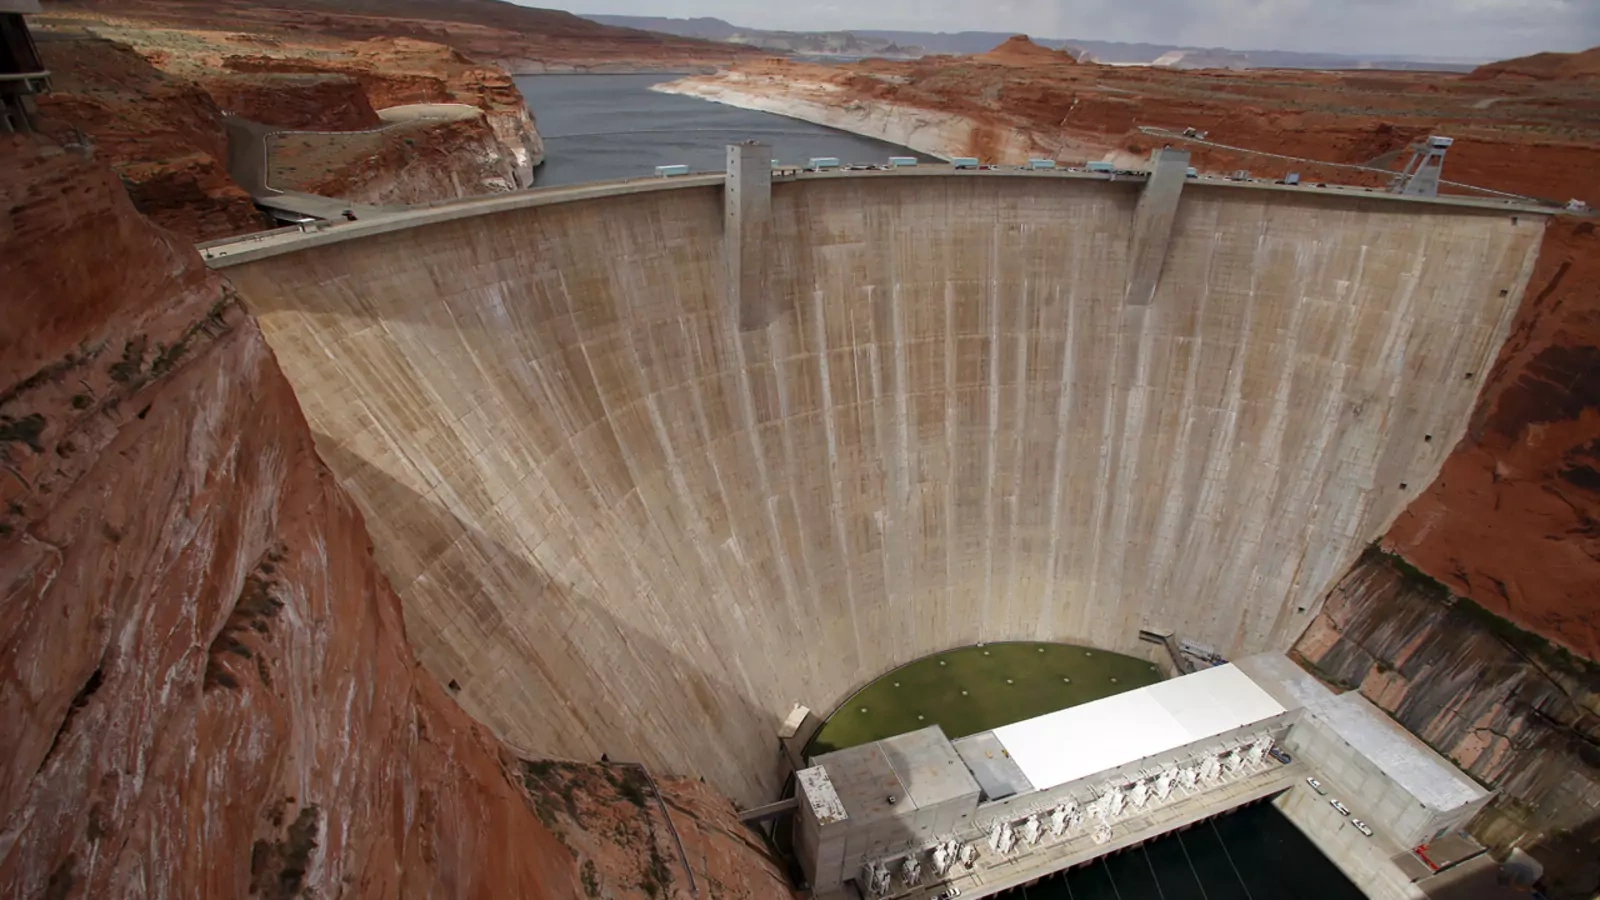 The drinking water reservoir created by the Glen Canyon Dam on the Colorado River falls to increasingly low levels.